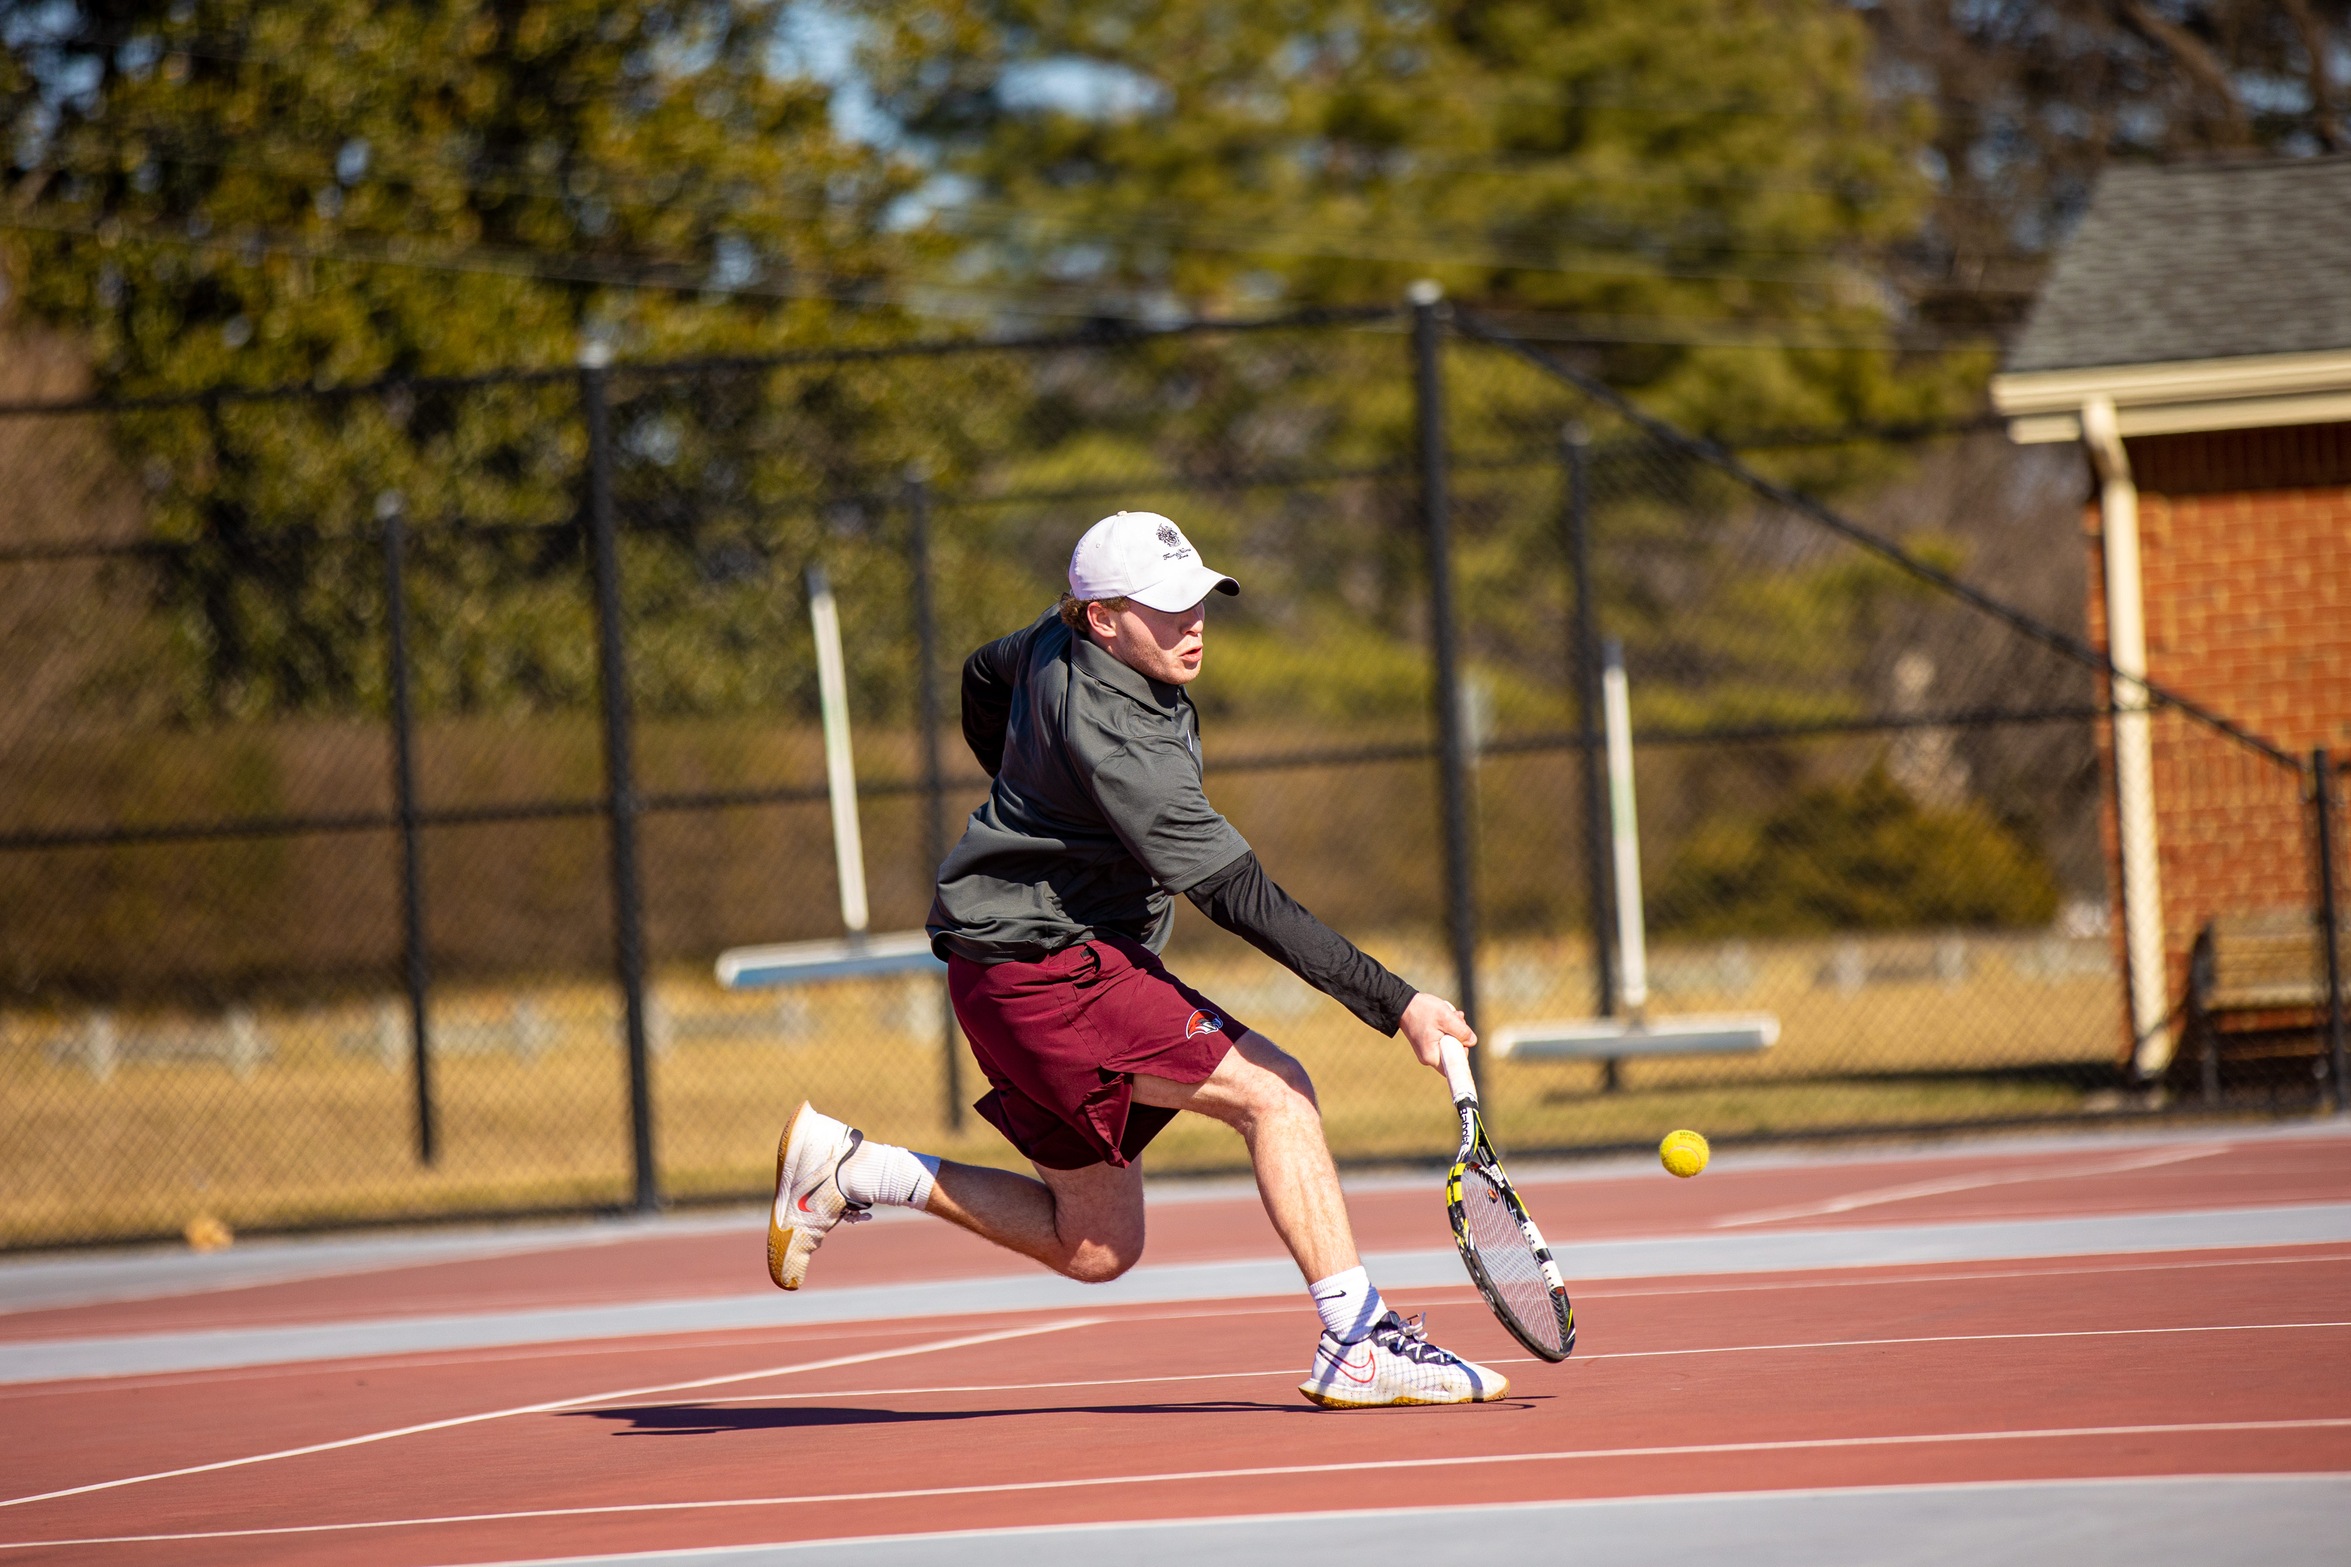 action photo of RC tennis player going to the net